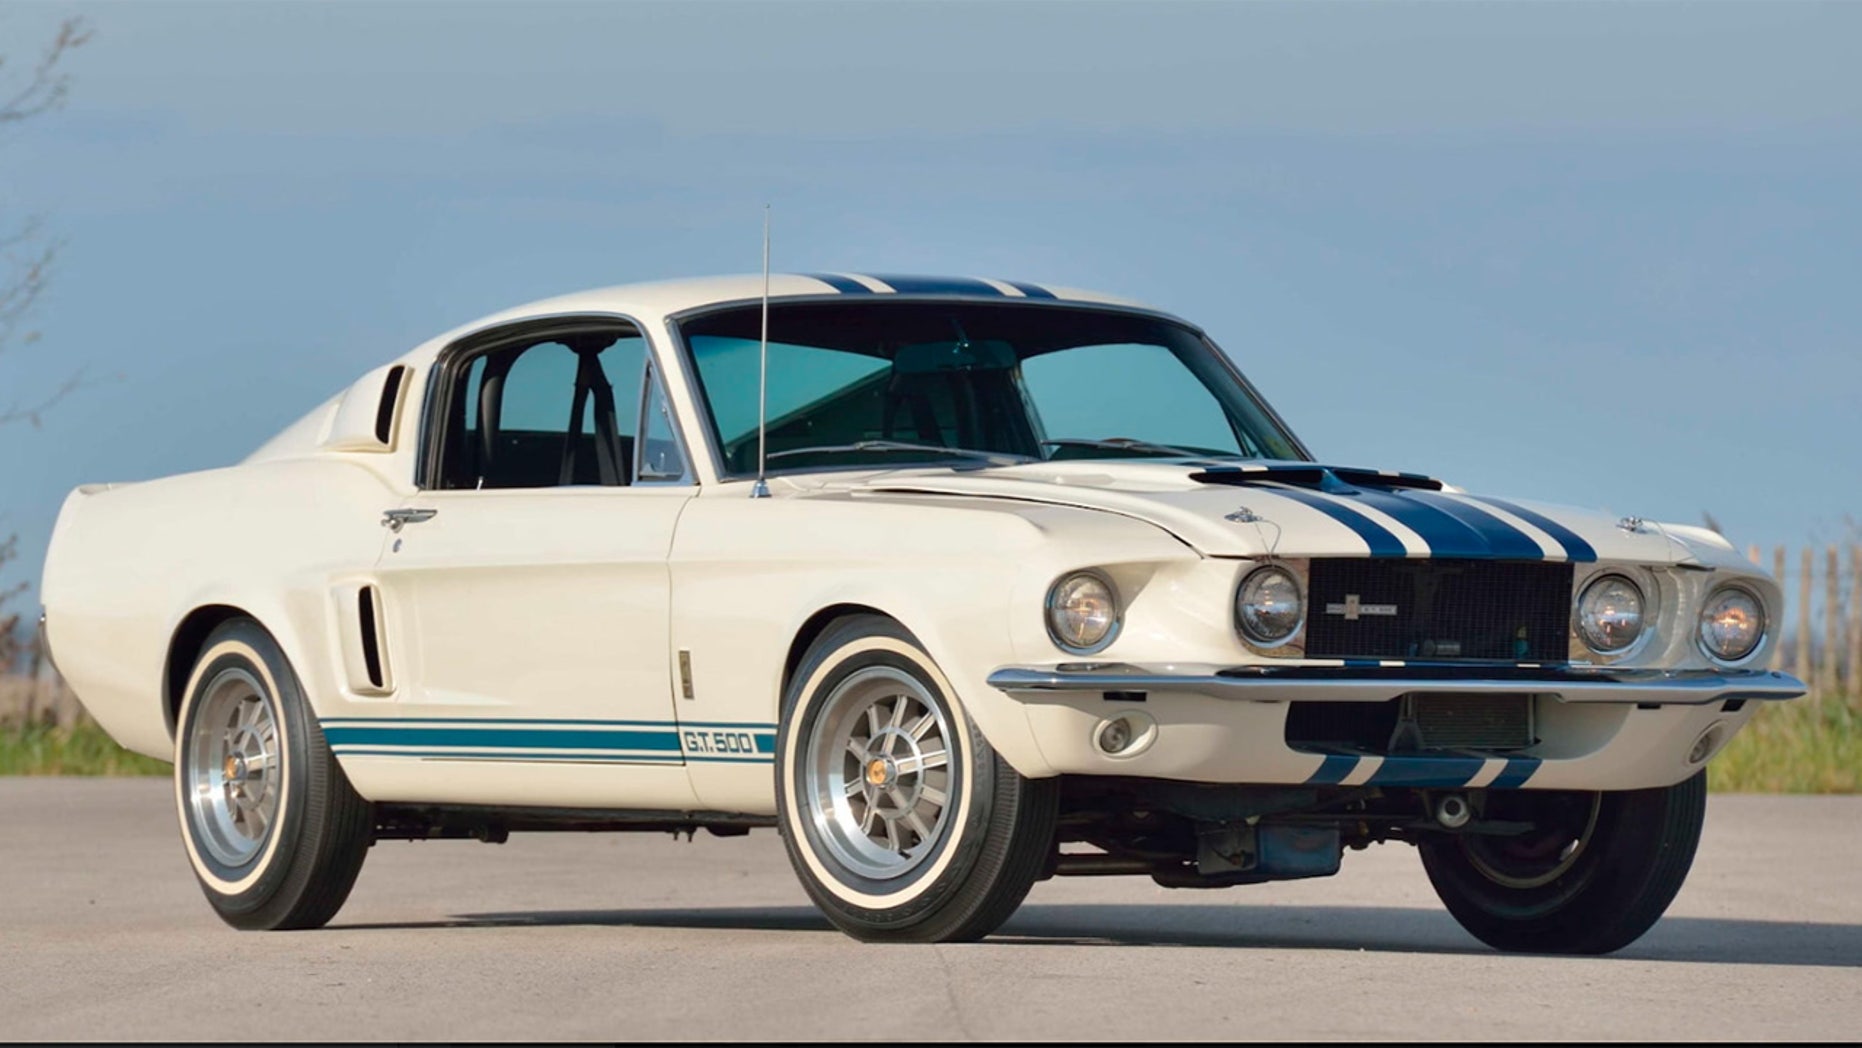 Unique 1967 Ford Mustang Shelby GT500 Super Snake sold at auction for record $2.2 million